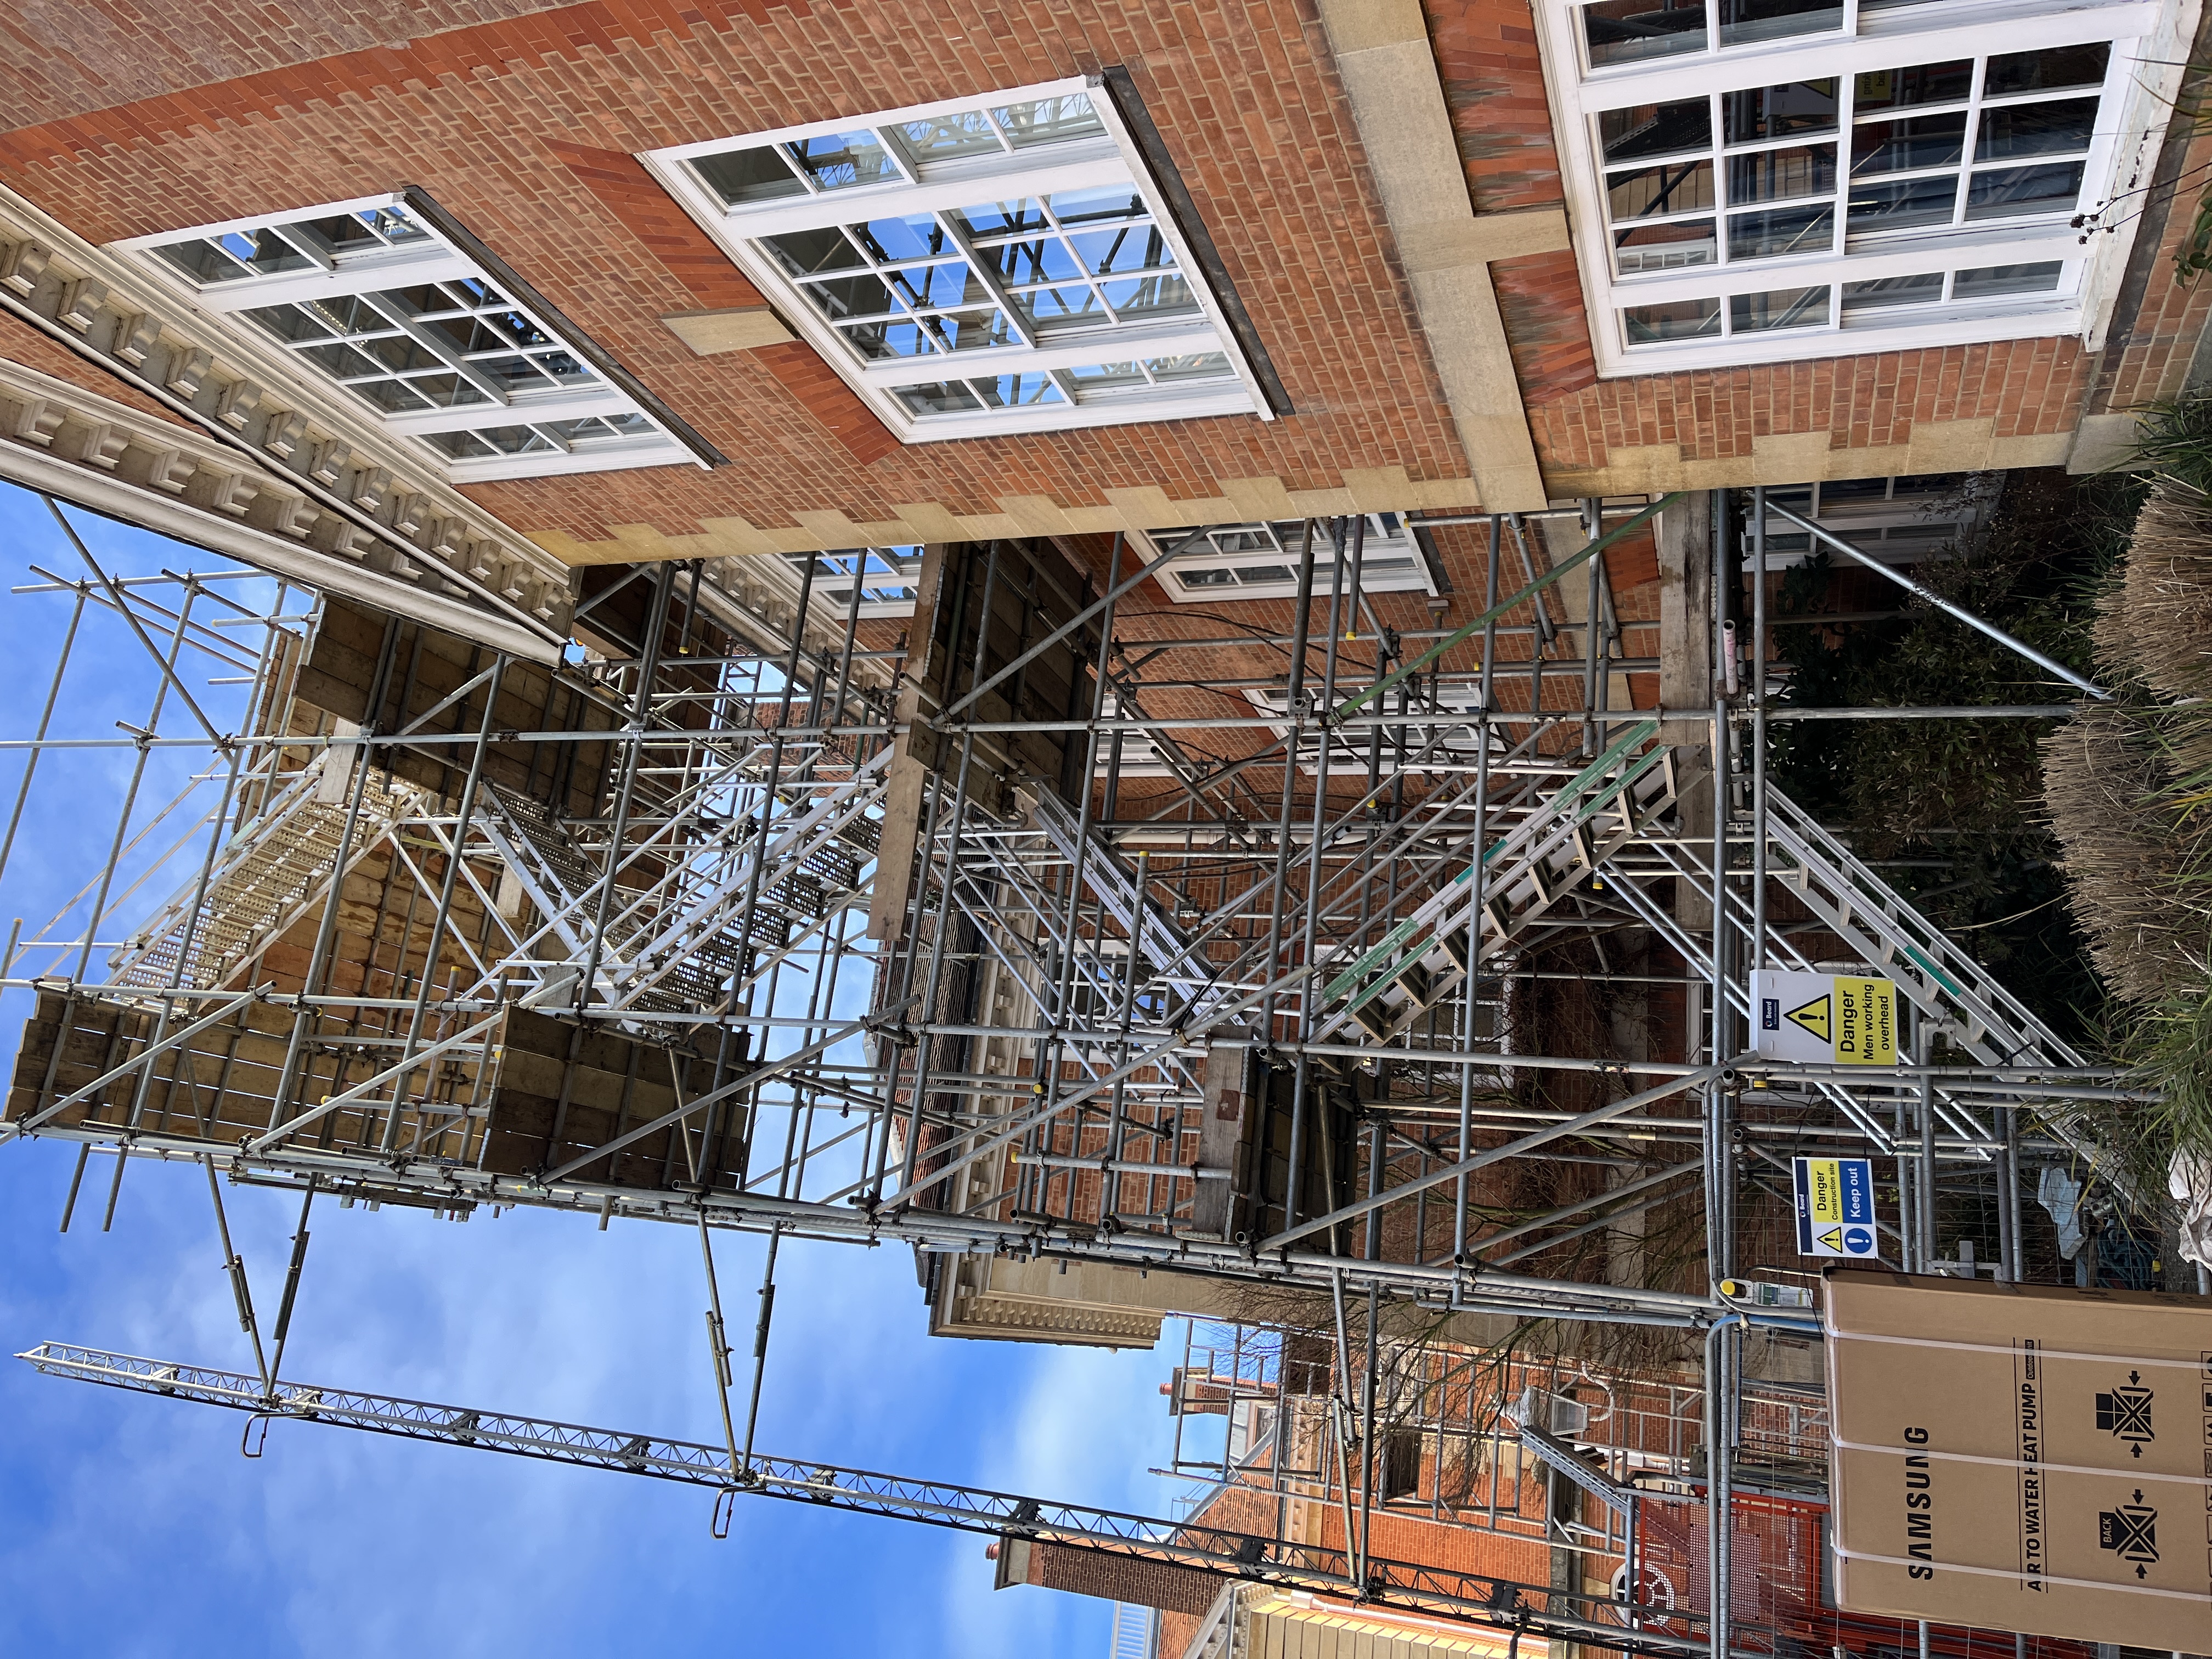 Photo of a red brick building with scaffolding